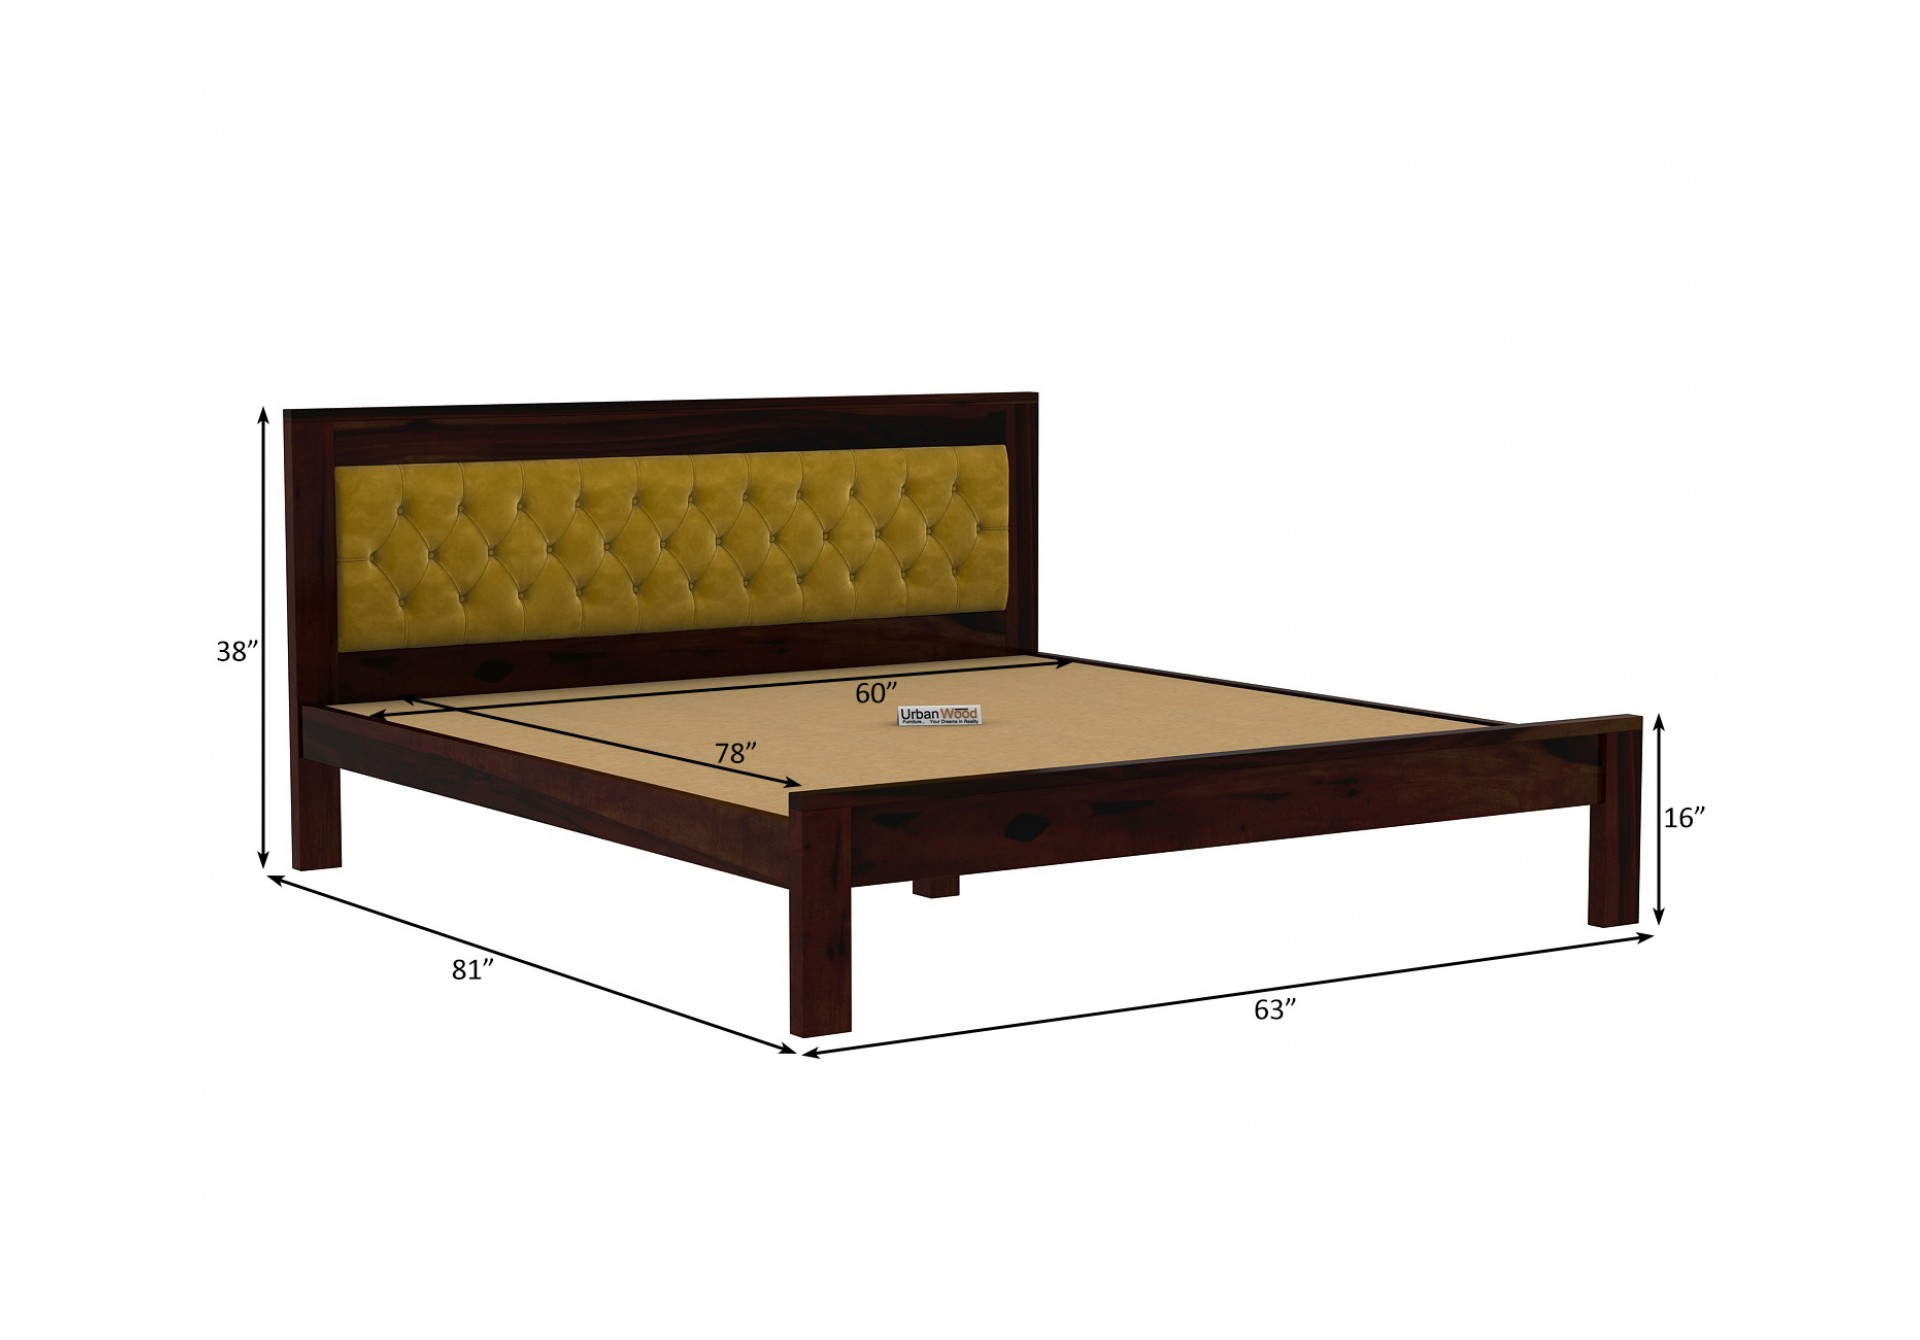 Jolly Wooden Bed without Storage ( Queen Size, Walnut Finish )